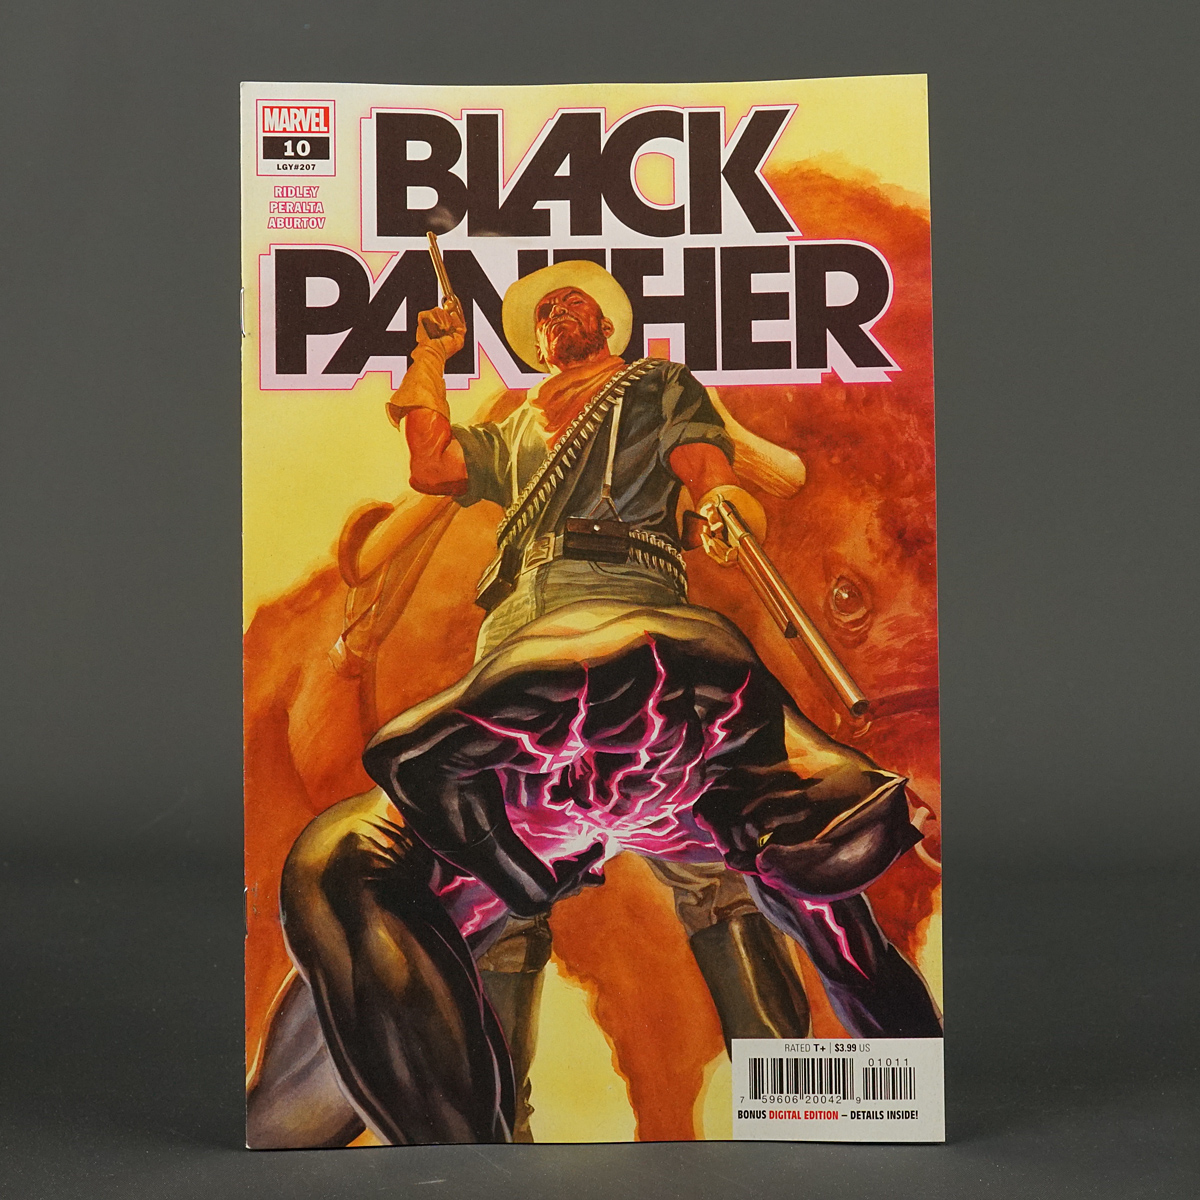 BLACK PANTHER #10 Marvel Comics 2022 AUG220895 (CA) Ross (W) Ridley (A) Peralta